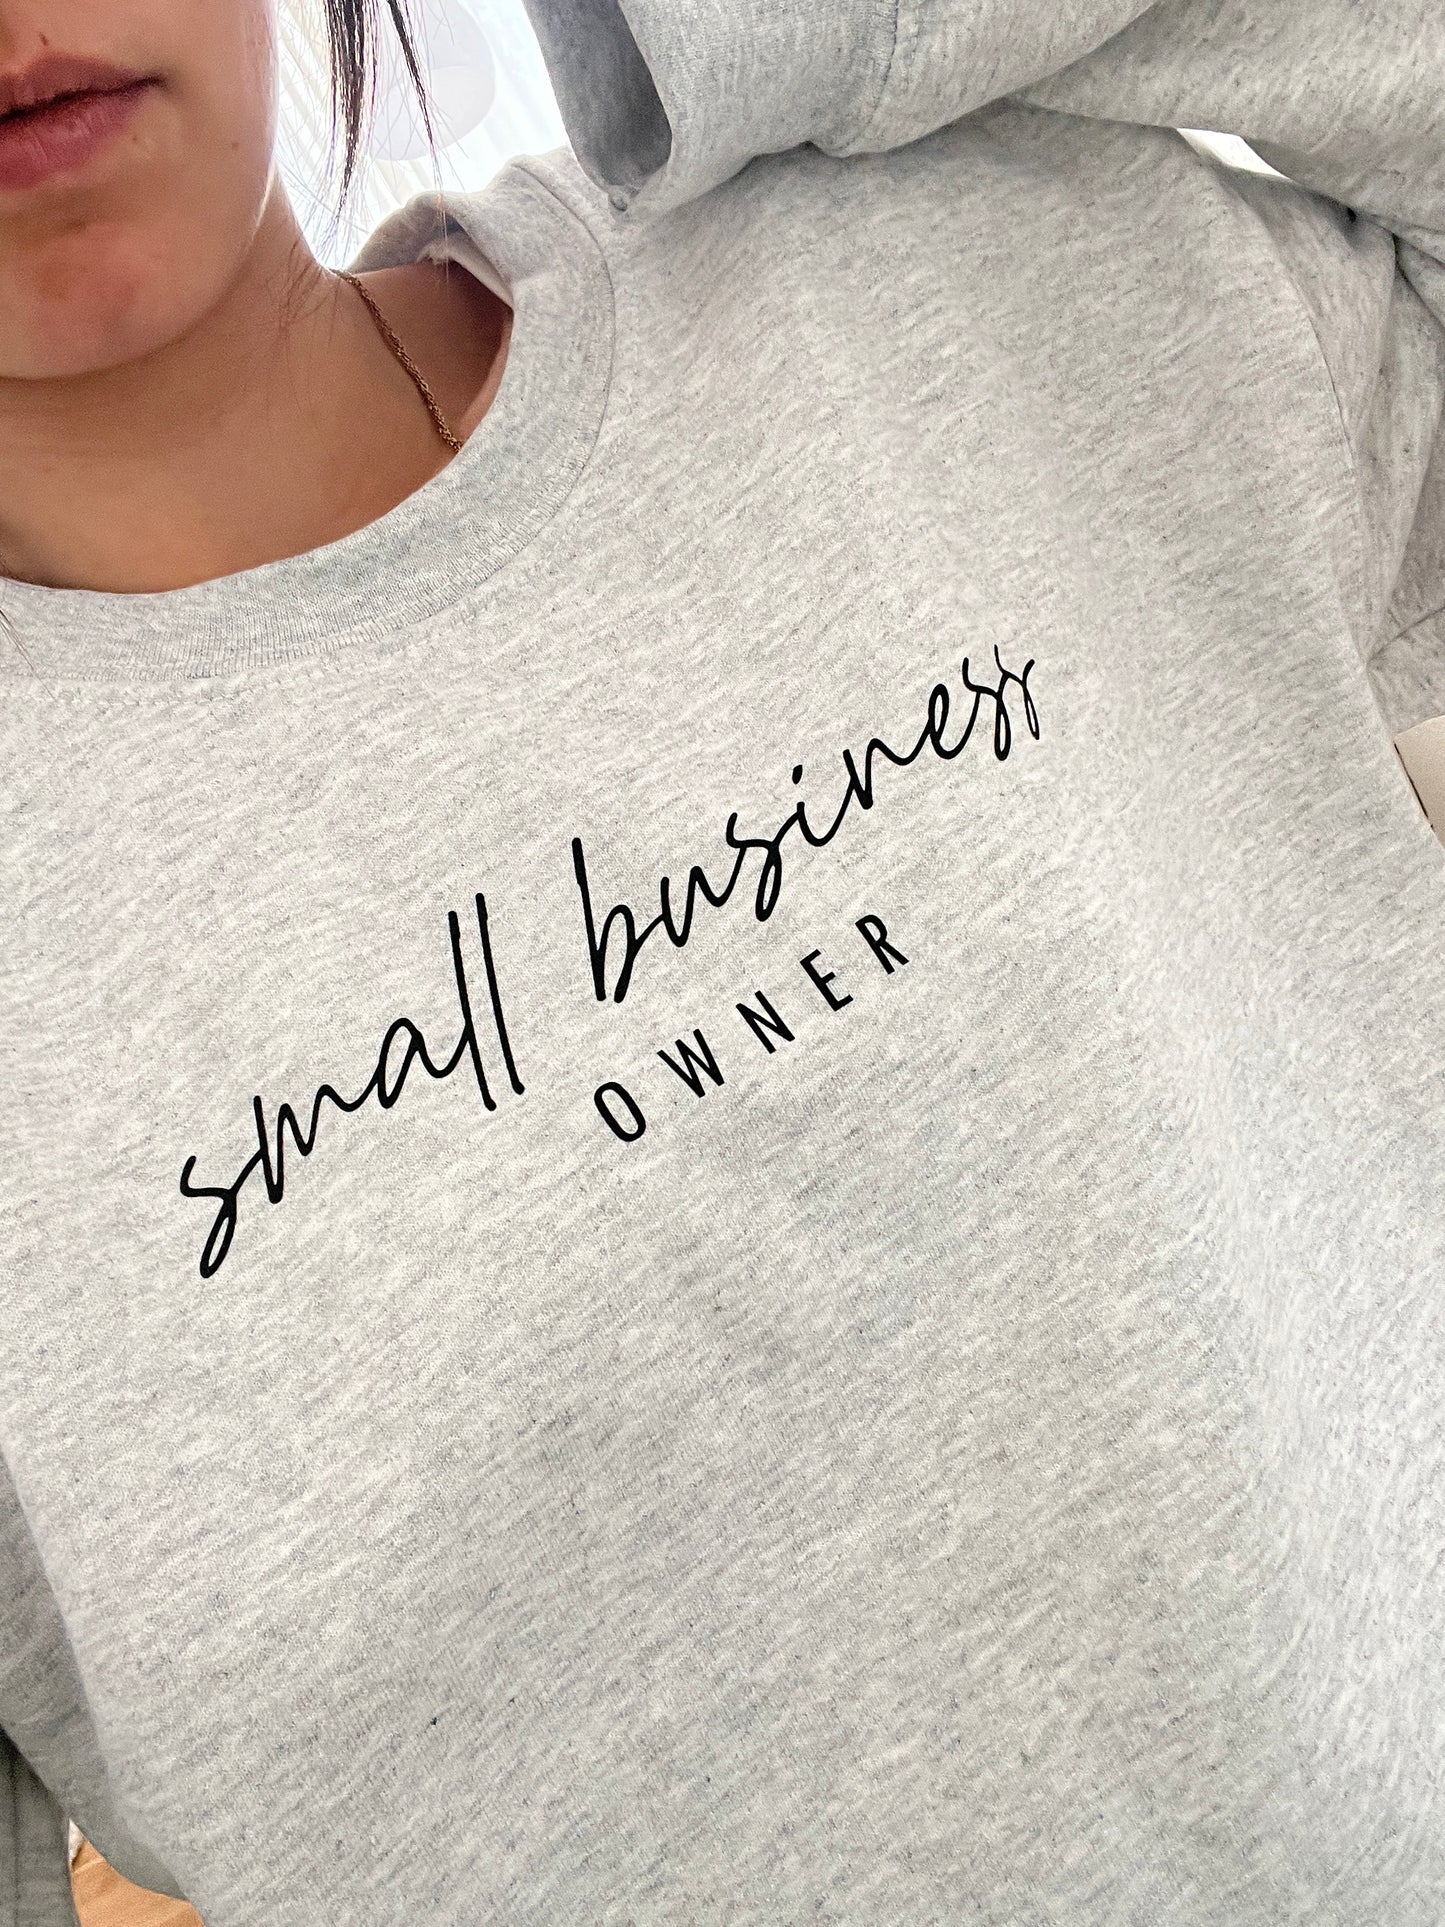 "Small Business Owner" Sweatshirt/Hoodie • Choose your own colours • Lifestyle Collection